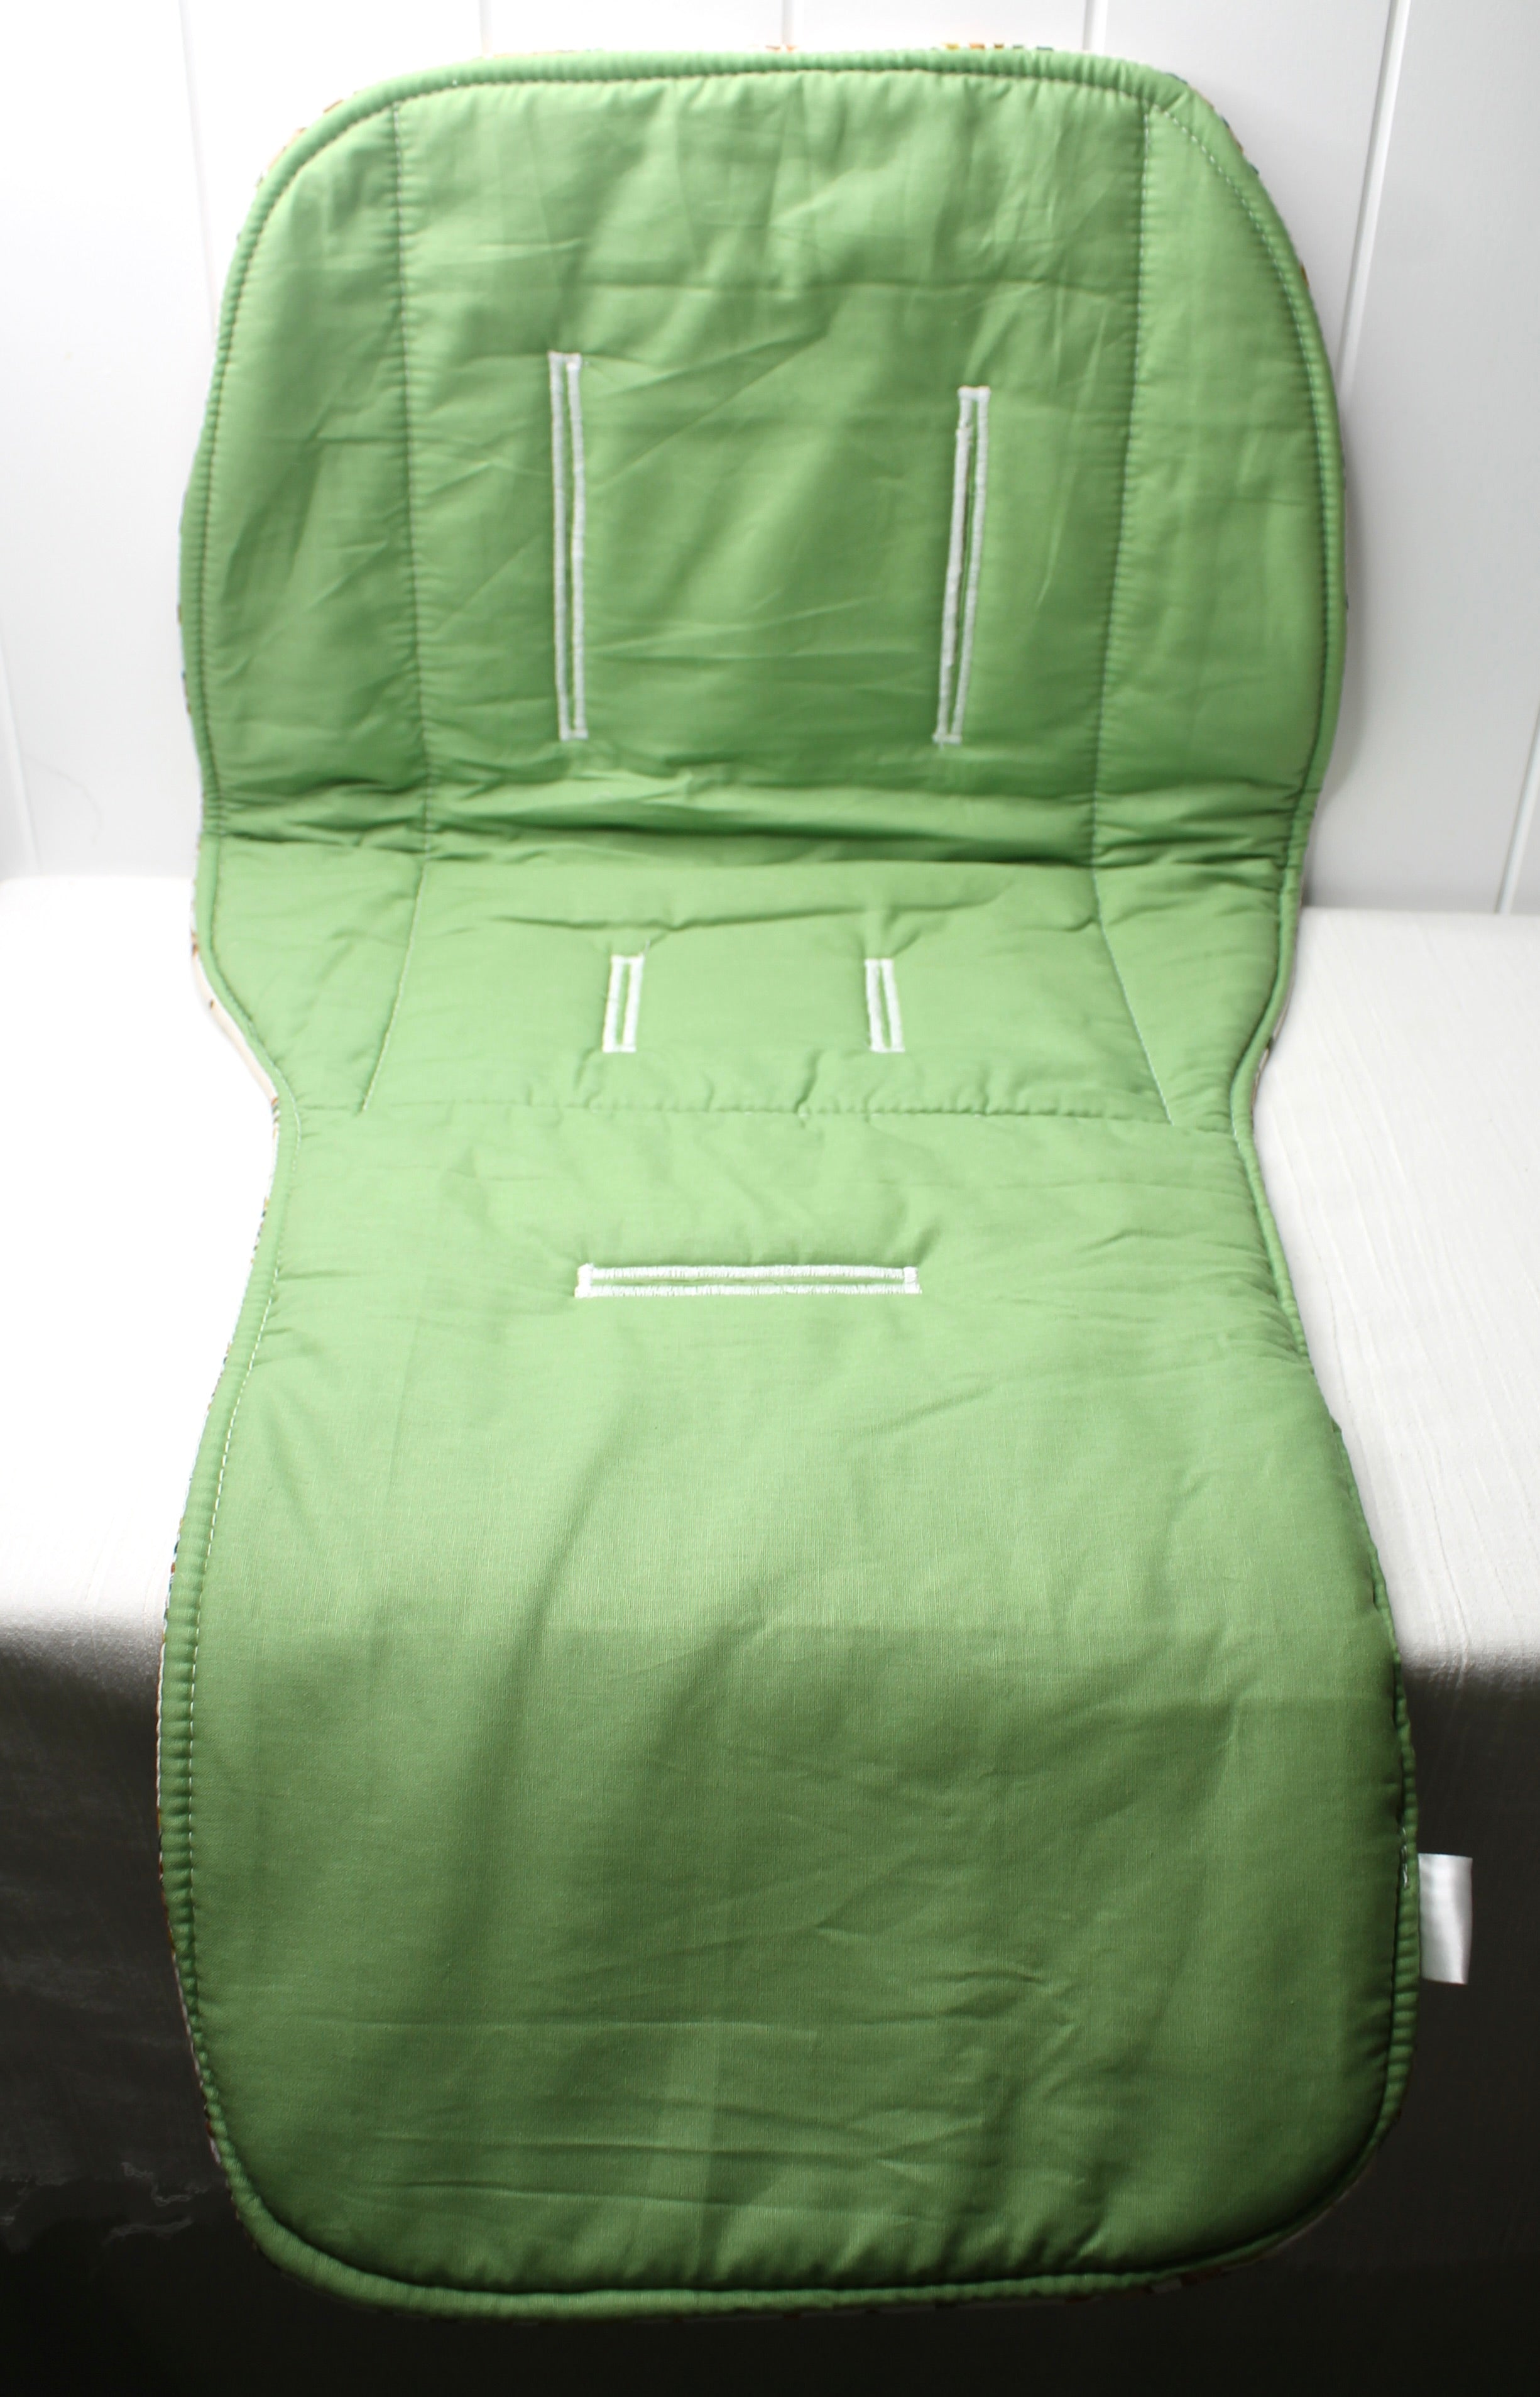 Lion / Sage Reversible Pram Liner with Strap Covers